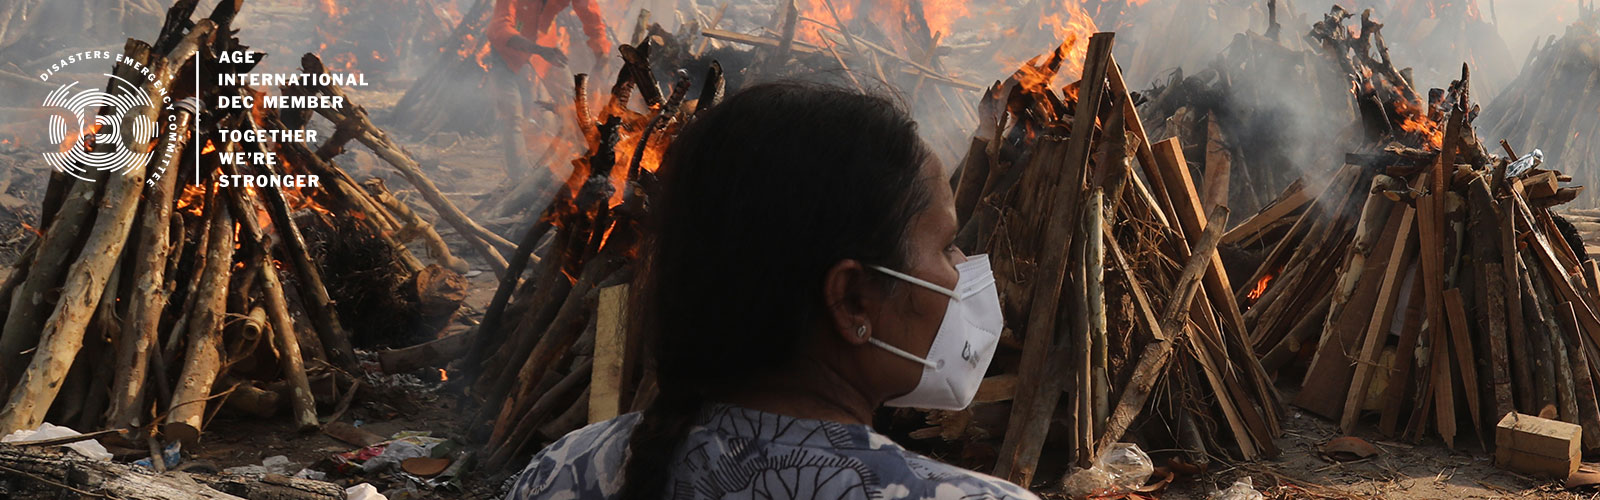 A family member looks on as several funeral pyres of patients who died of Covid-19 burn during the mass cremation at Ghazipur cremation ground in New Delhi, India.